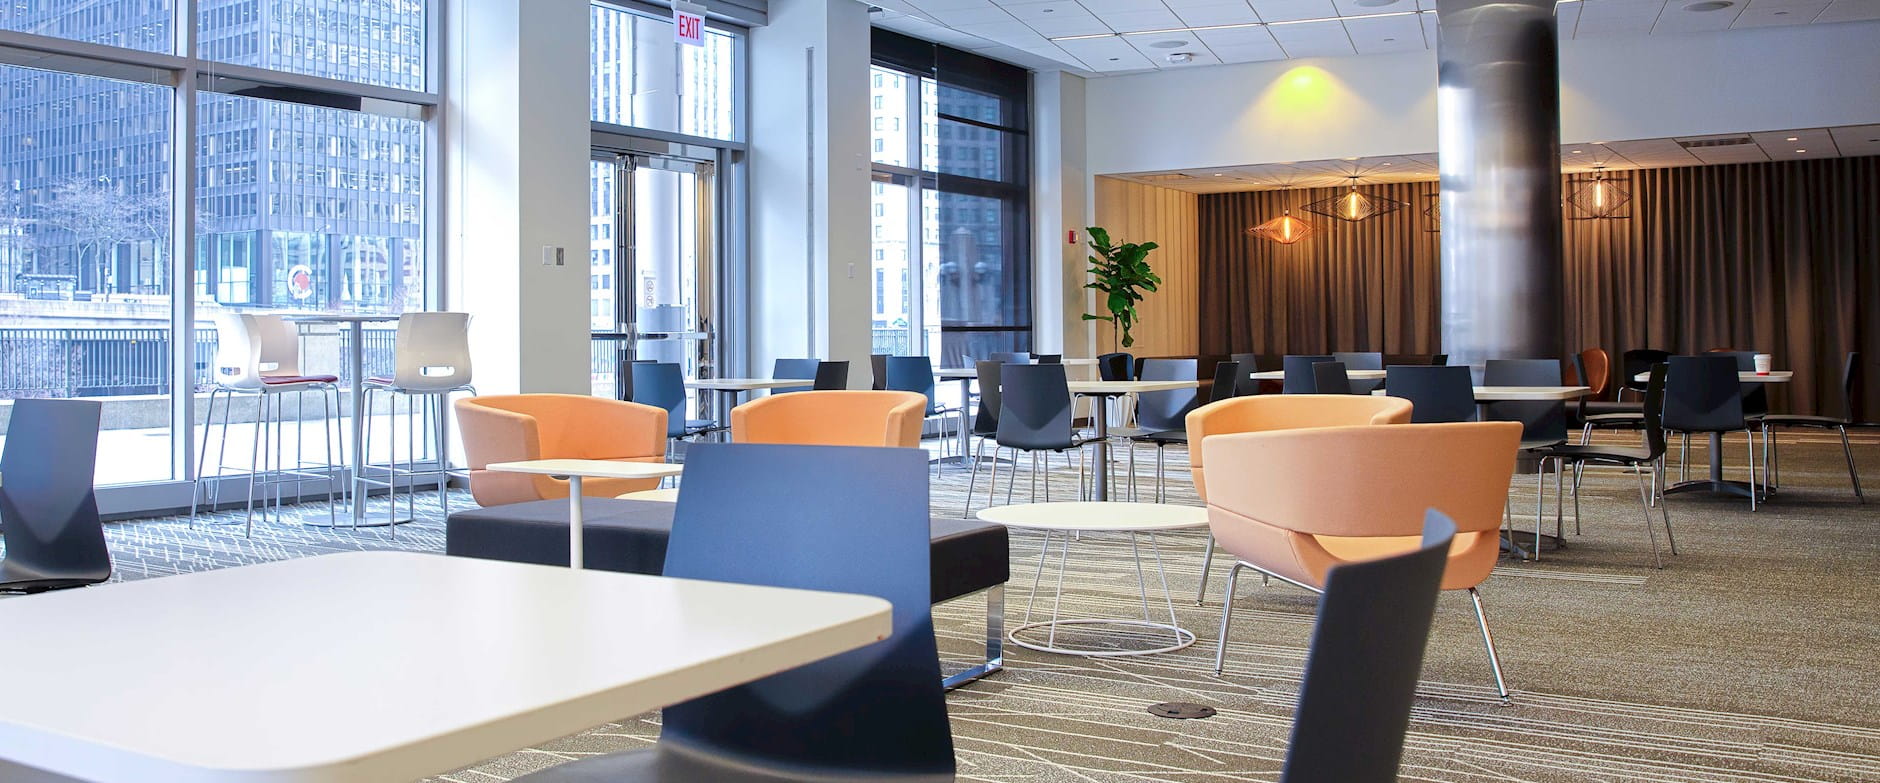 Lobby Lounge in Gleacher Center with a set of table and chairs toward a brown fabric feature wall and wall of floor-to-ceiling windows